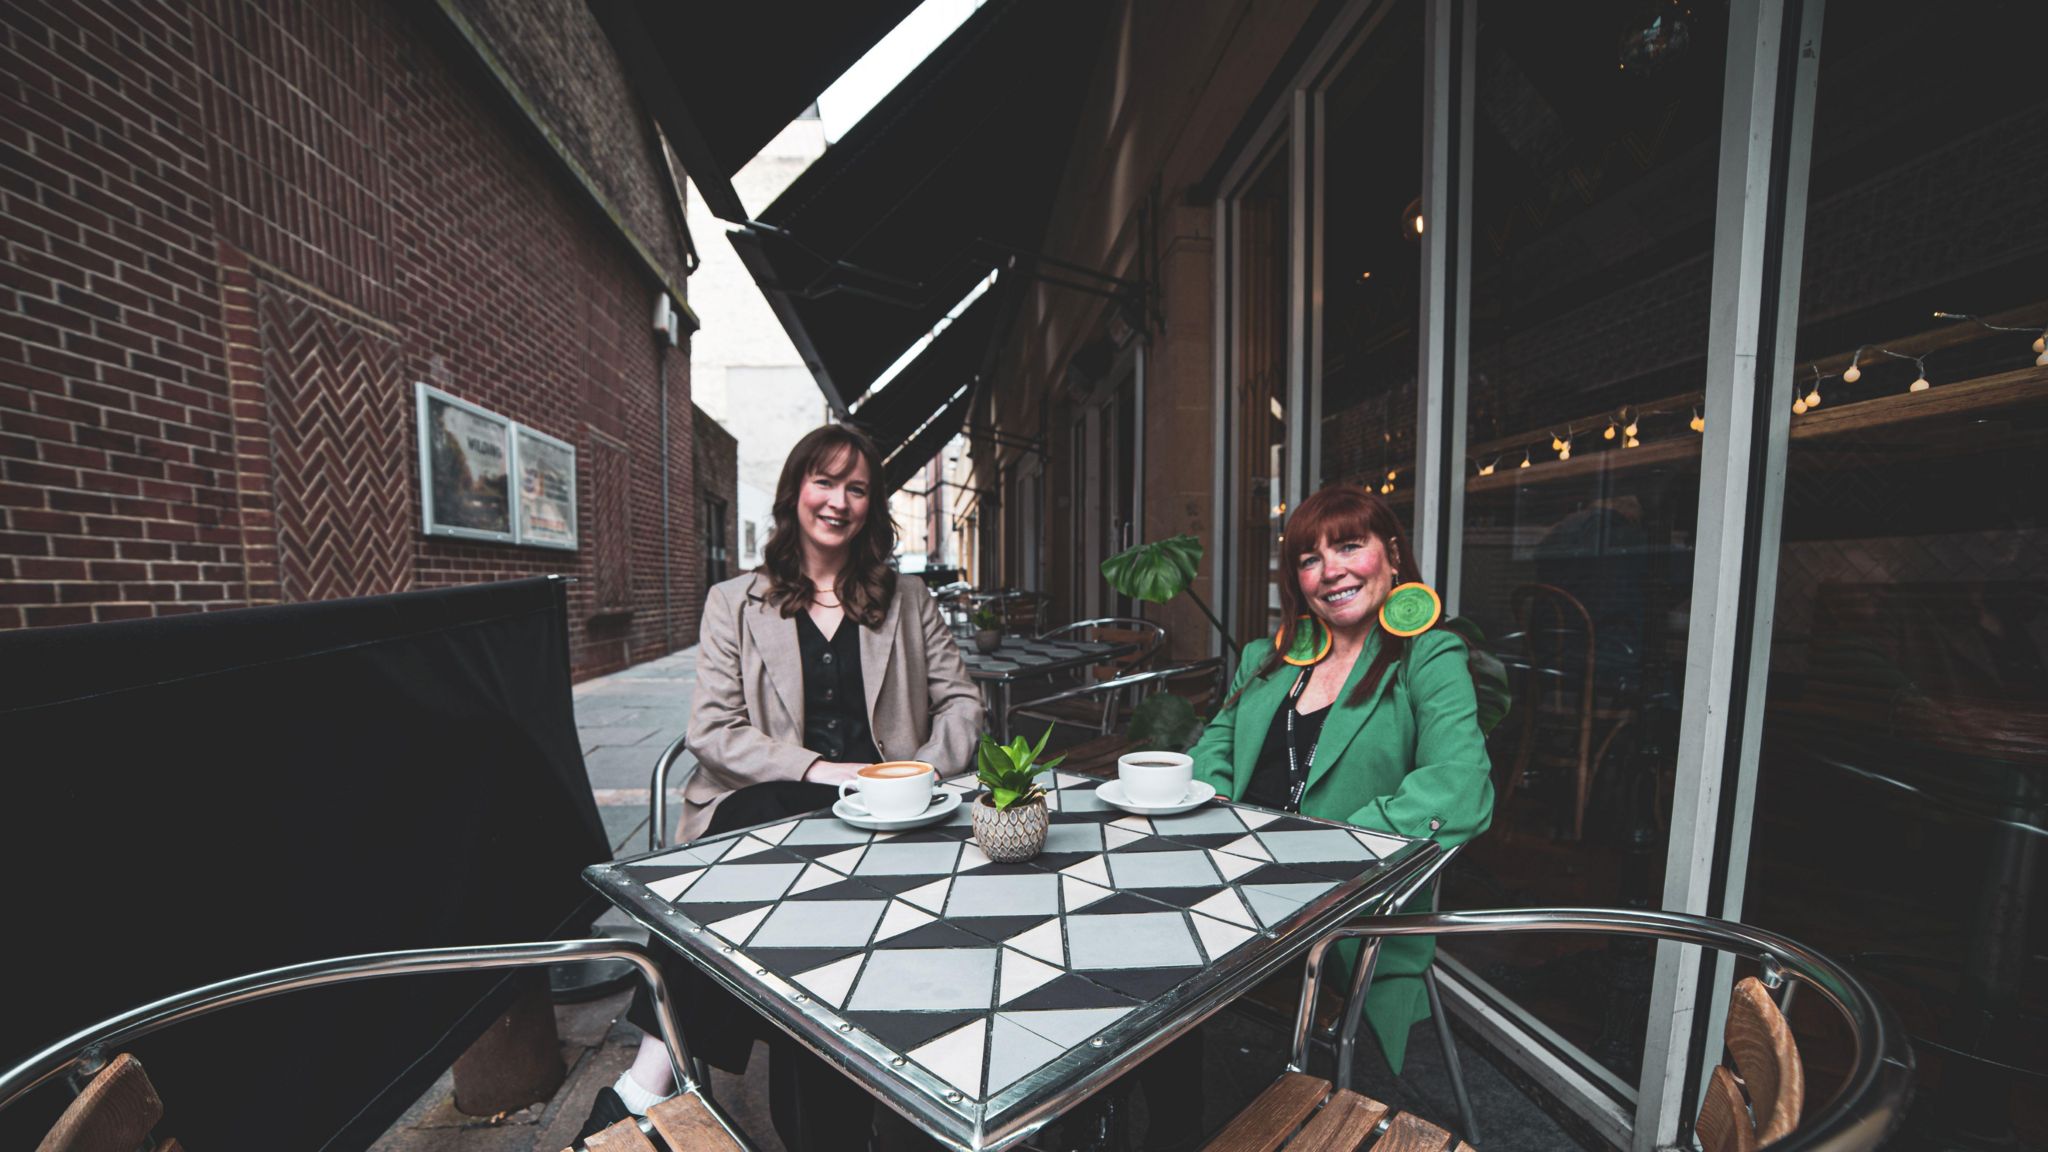 Naomi Allen Seales, Investment Manager at Northstar Ventures, with Nic Greenan, chief executive officer at the Tyneside Cinema, sitting outside at a table with cups of tea and coffee